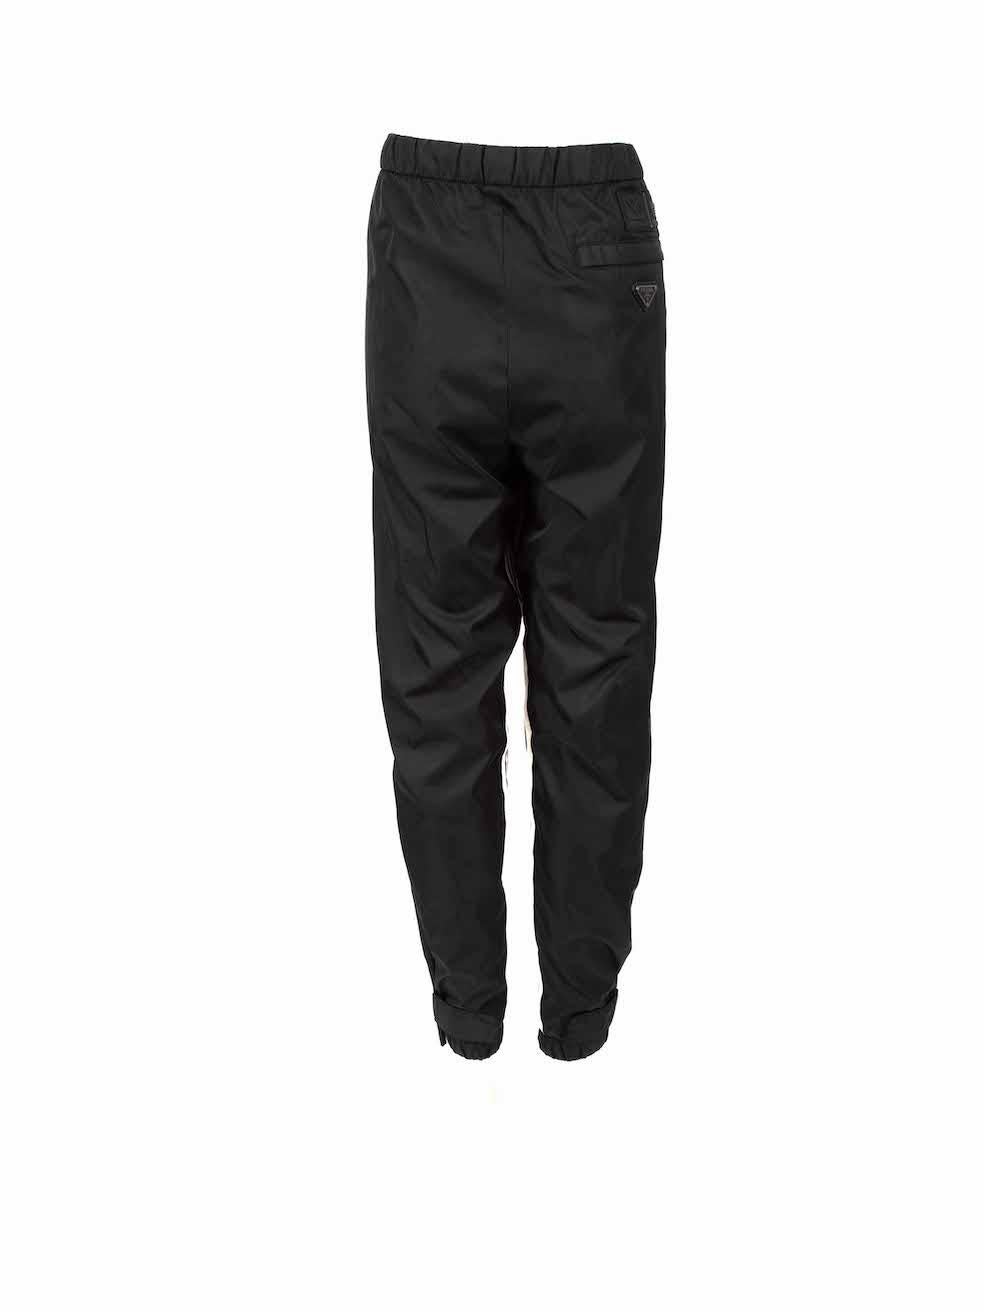 Prada Black Re-Nylon Shell Track Trousers Size L In Excellent Condition For Sale In London, GB